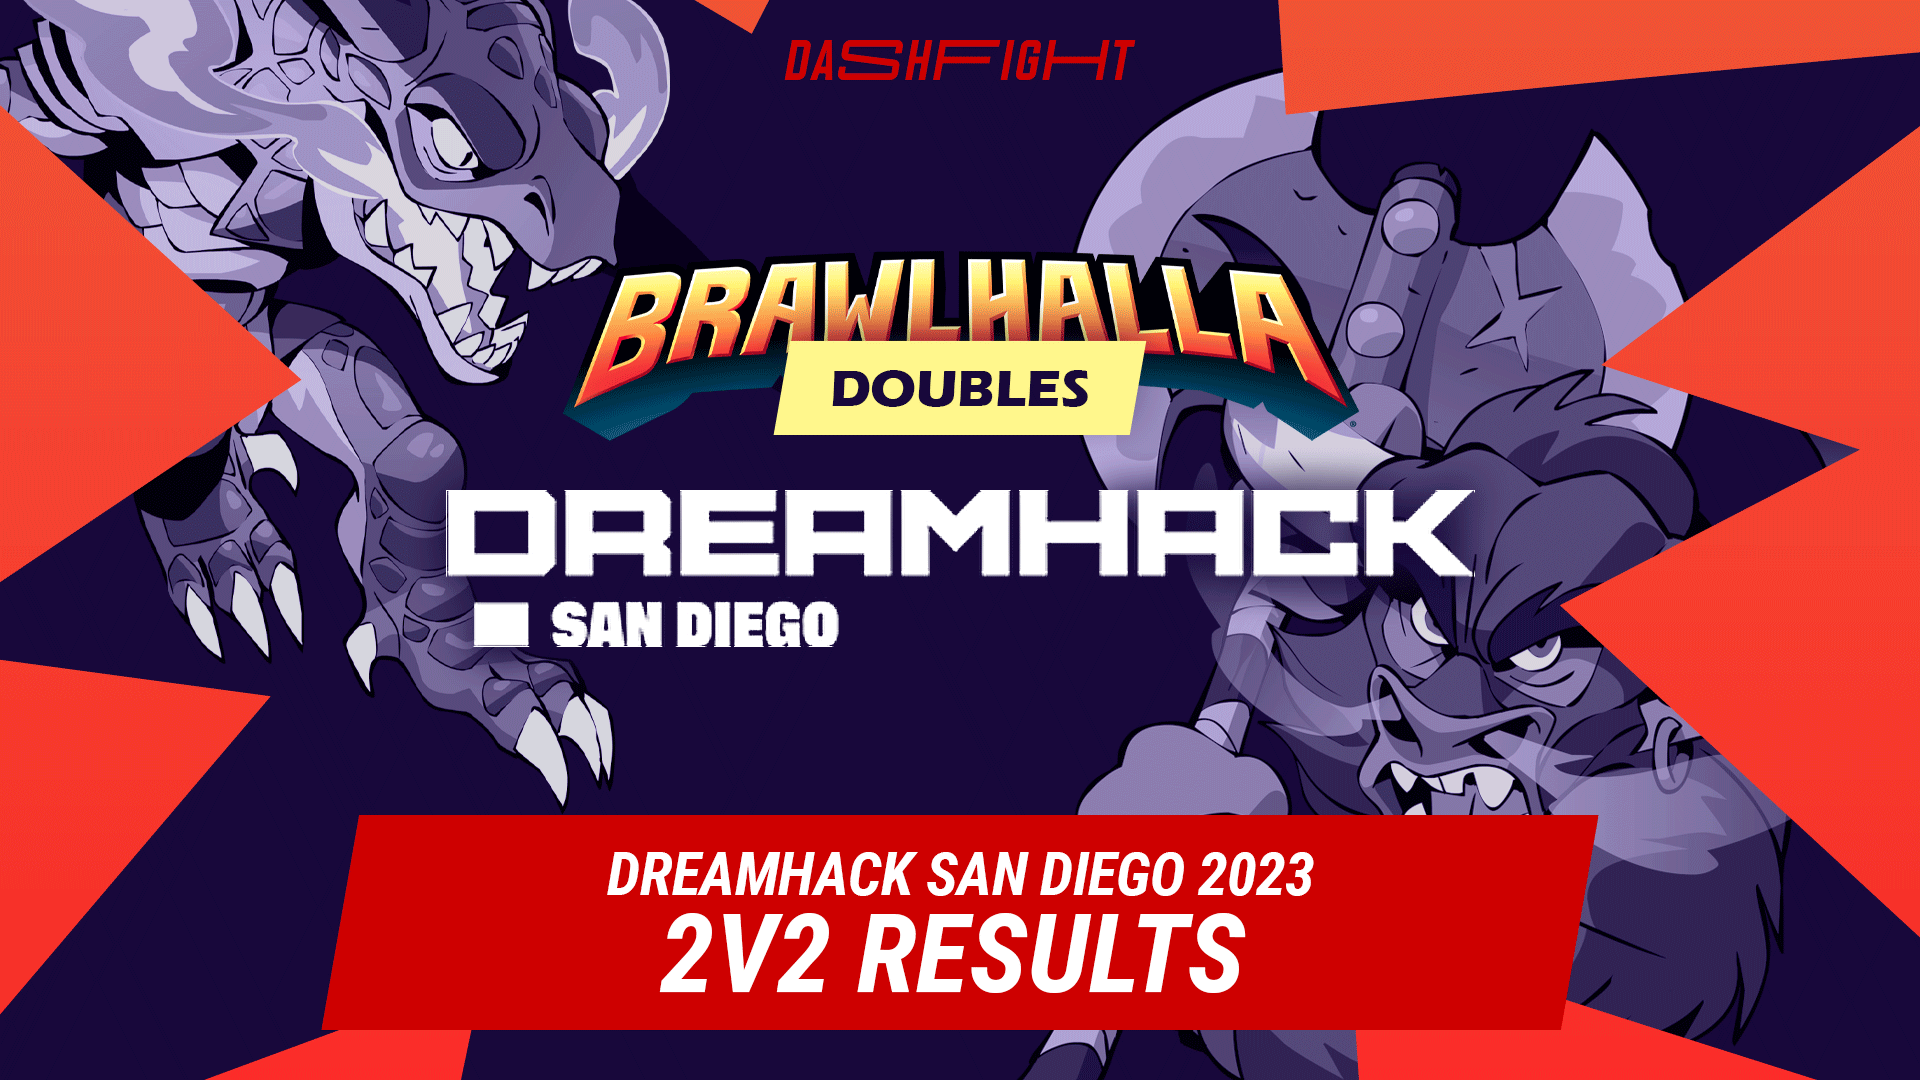 Brawlhalla at DreamHack San Diego 2023: Doubles